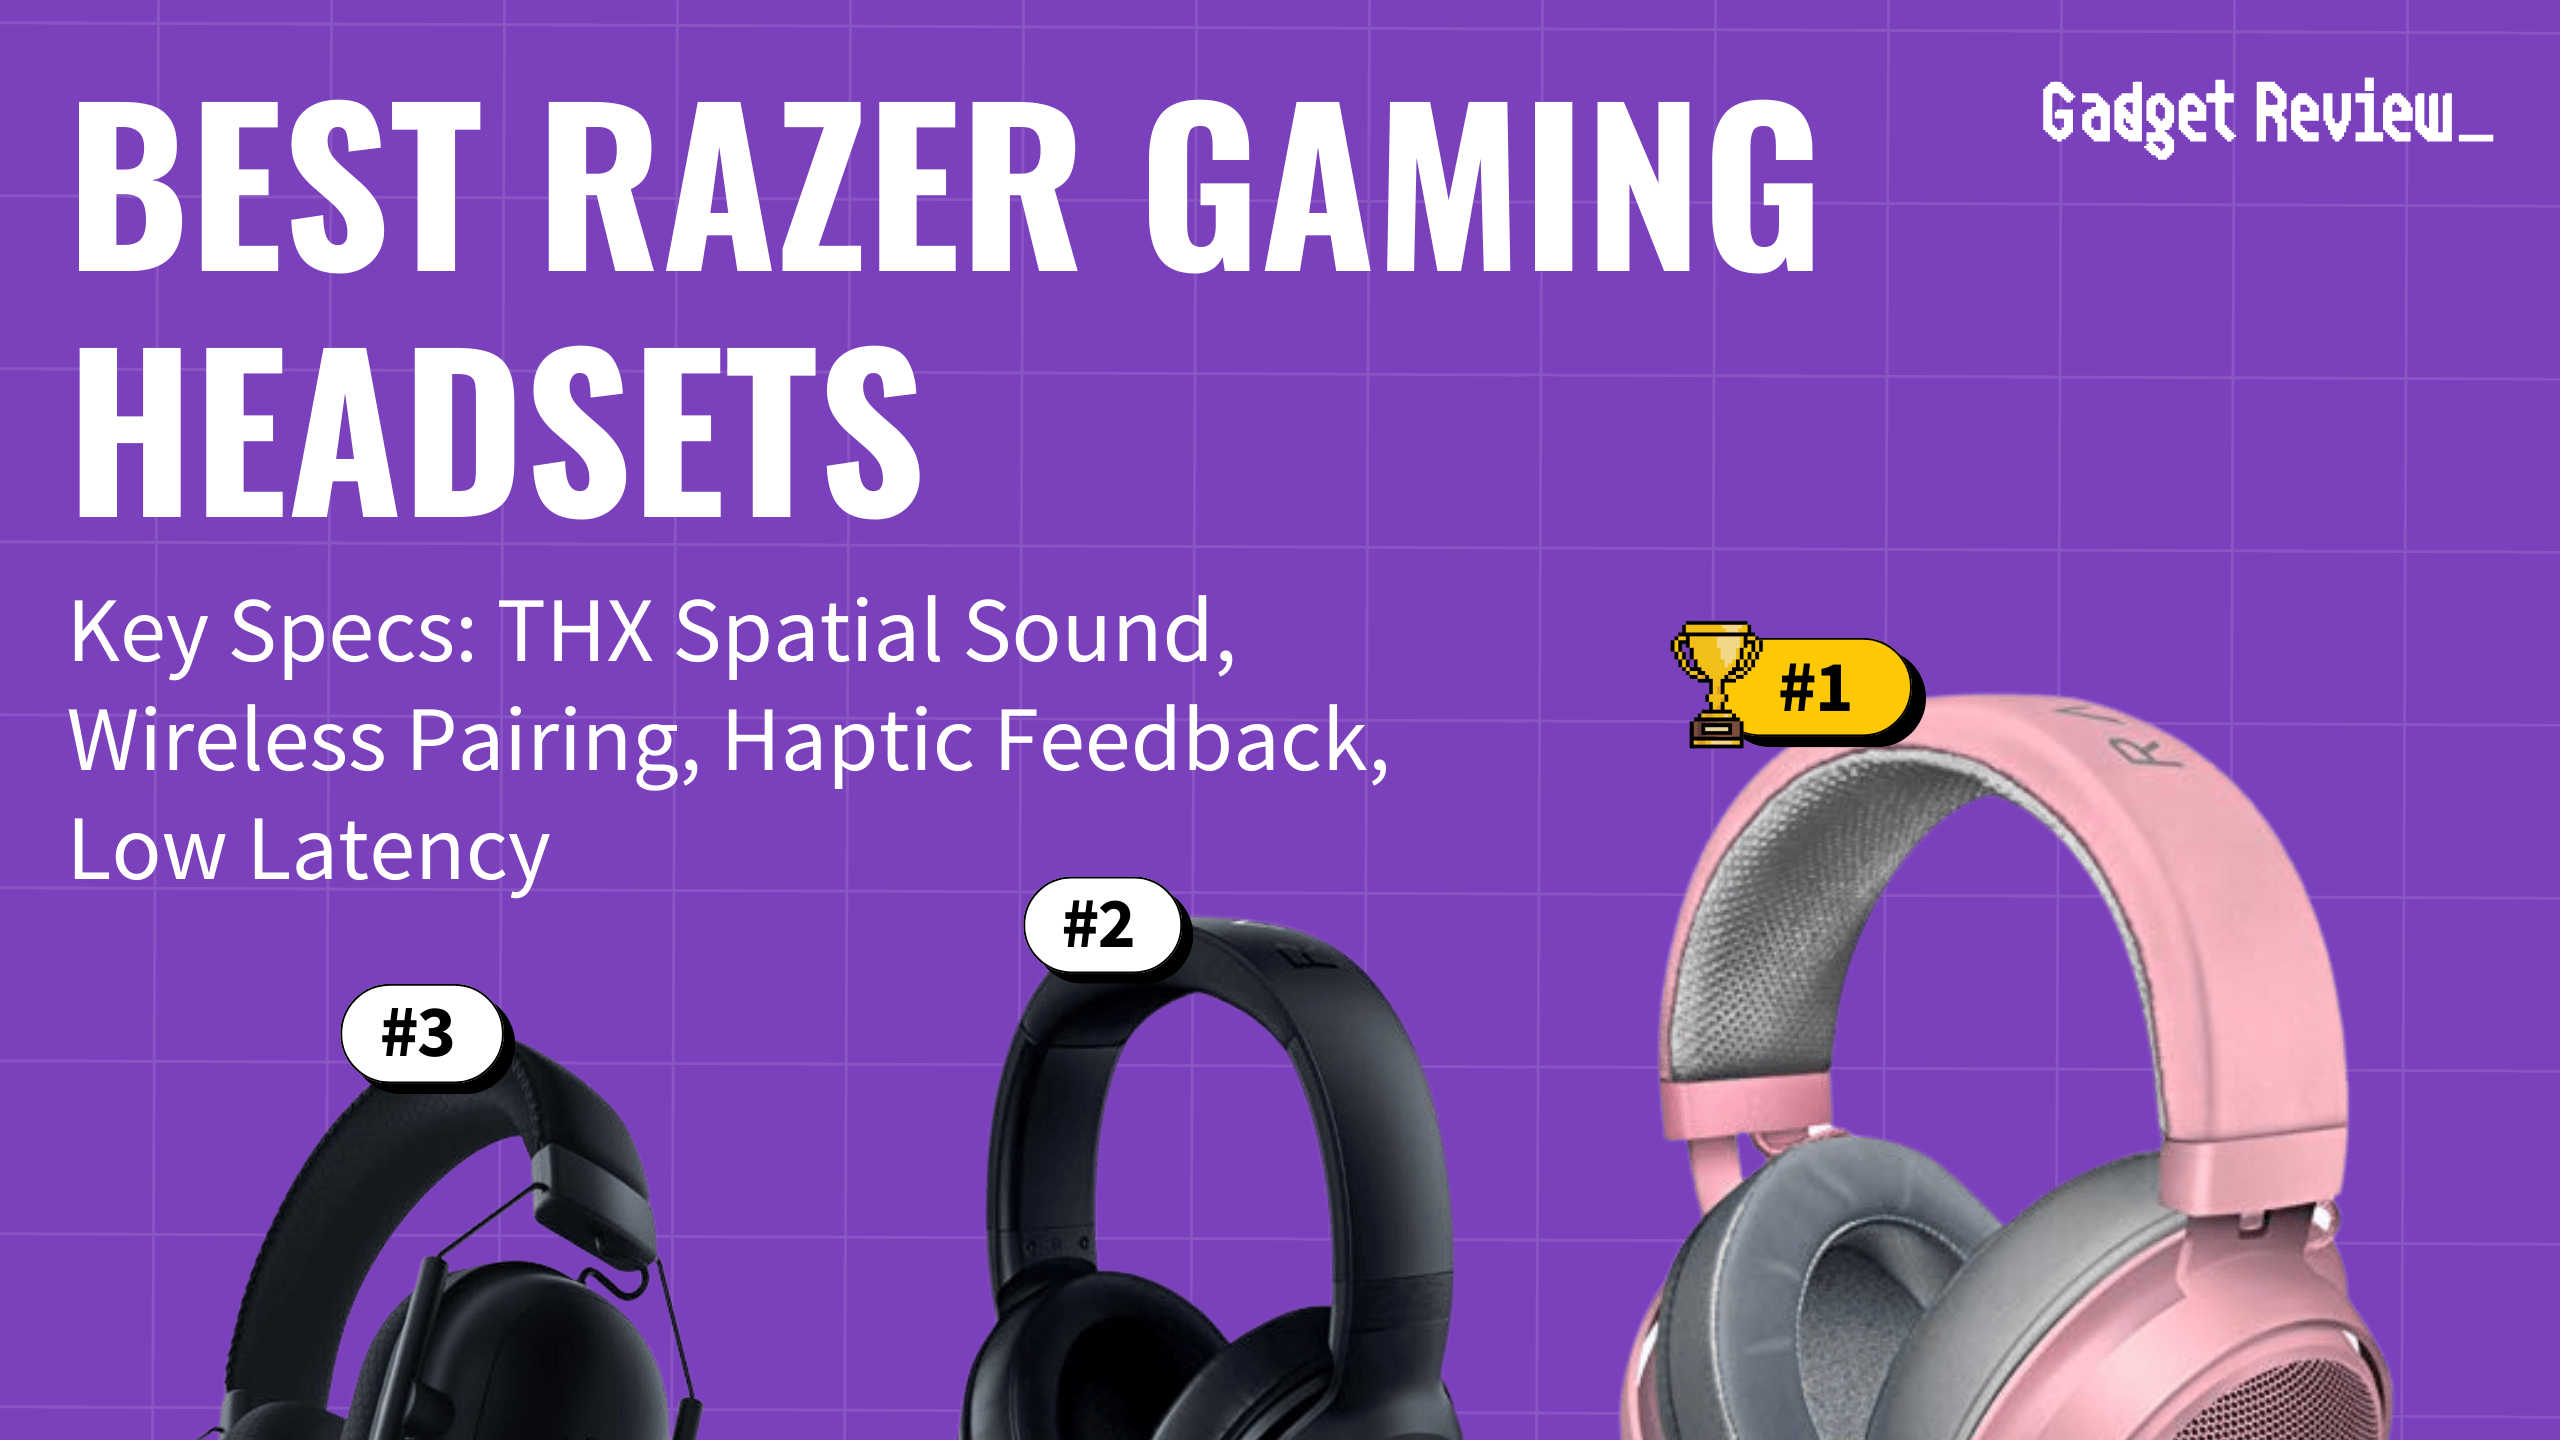 best razer gaming headset featured image that shows the top three best gaming headset models